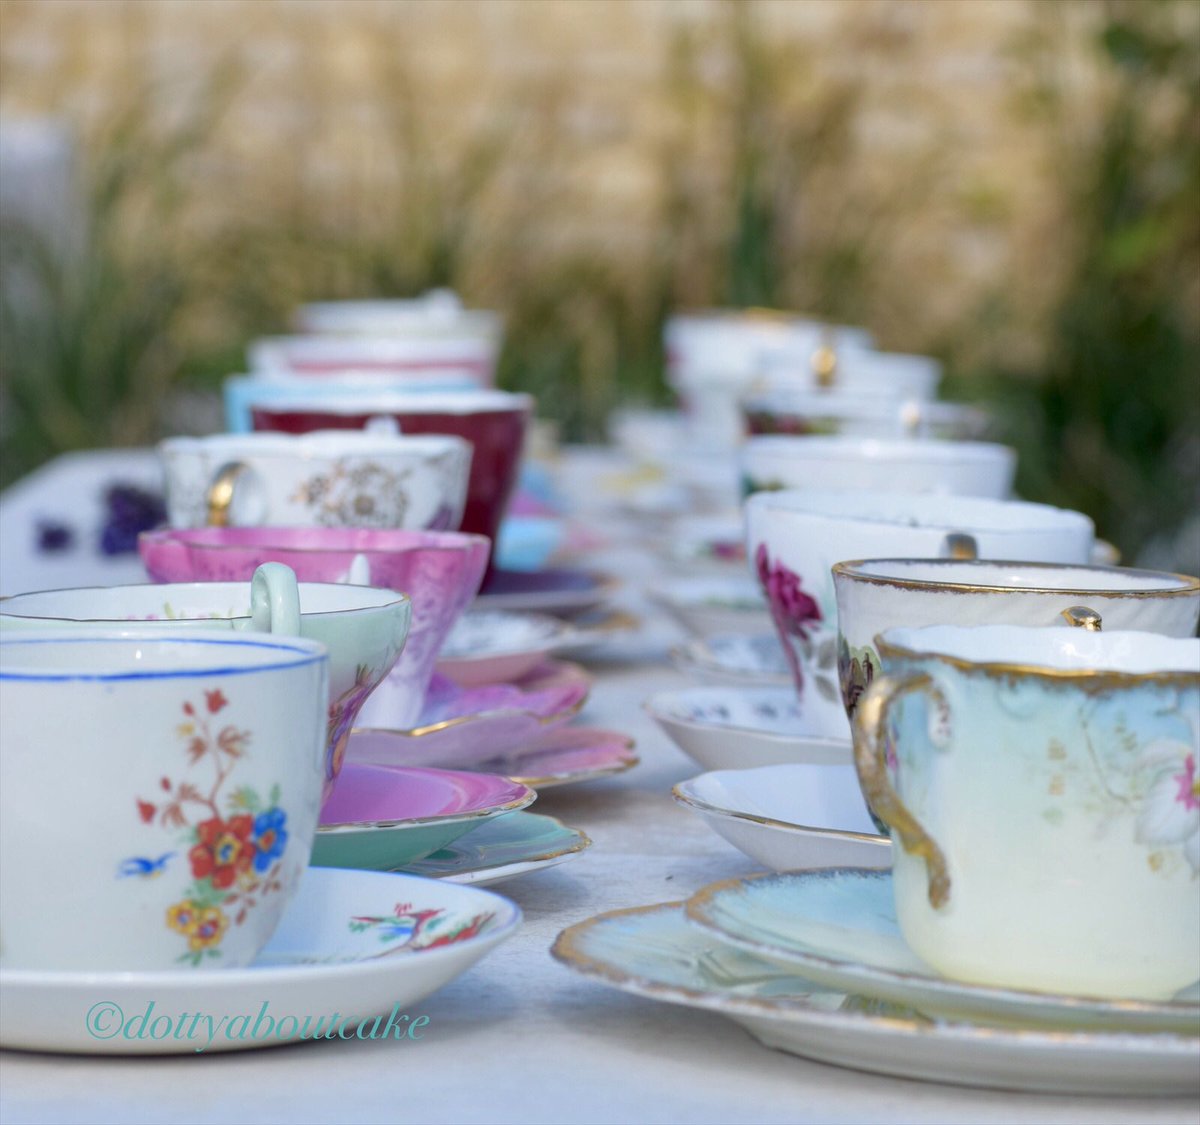 Teacups are ready! Looking forward to seeing all our lovely customers in the tea tent in May😀
#teatent #homemadecake #dottyaboutcake #ageconcern #wealdentimesmidsummerfair